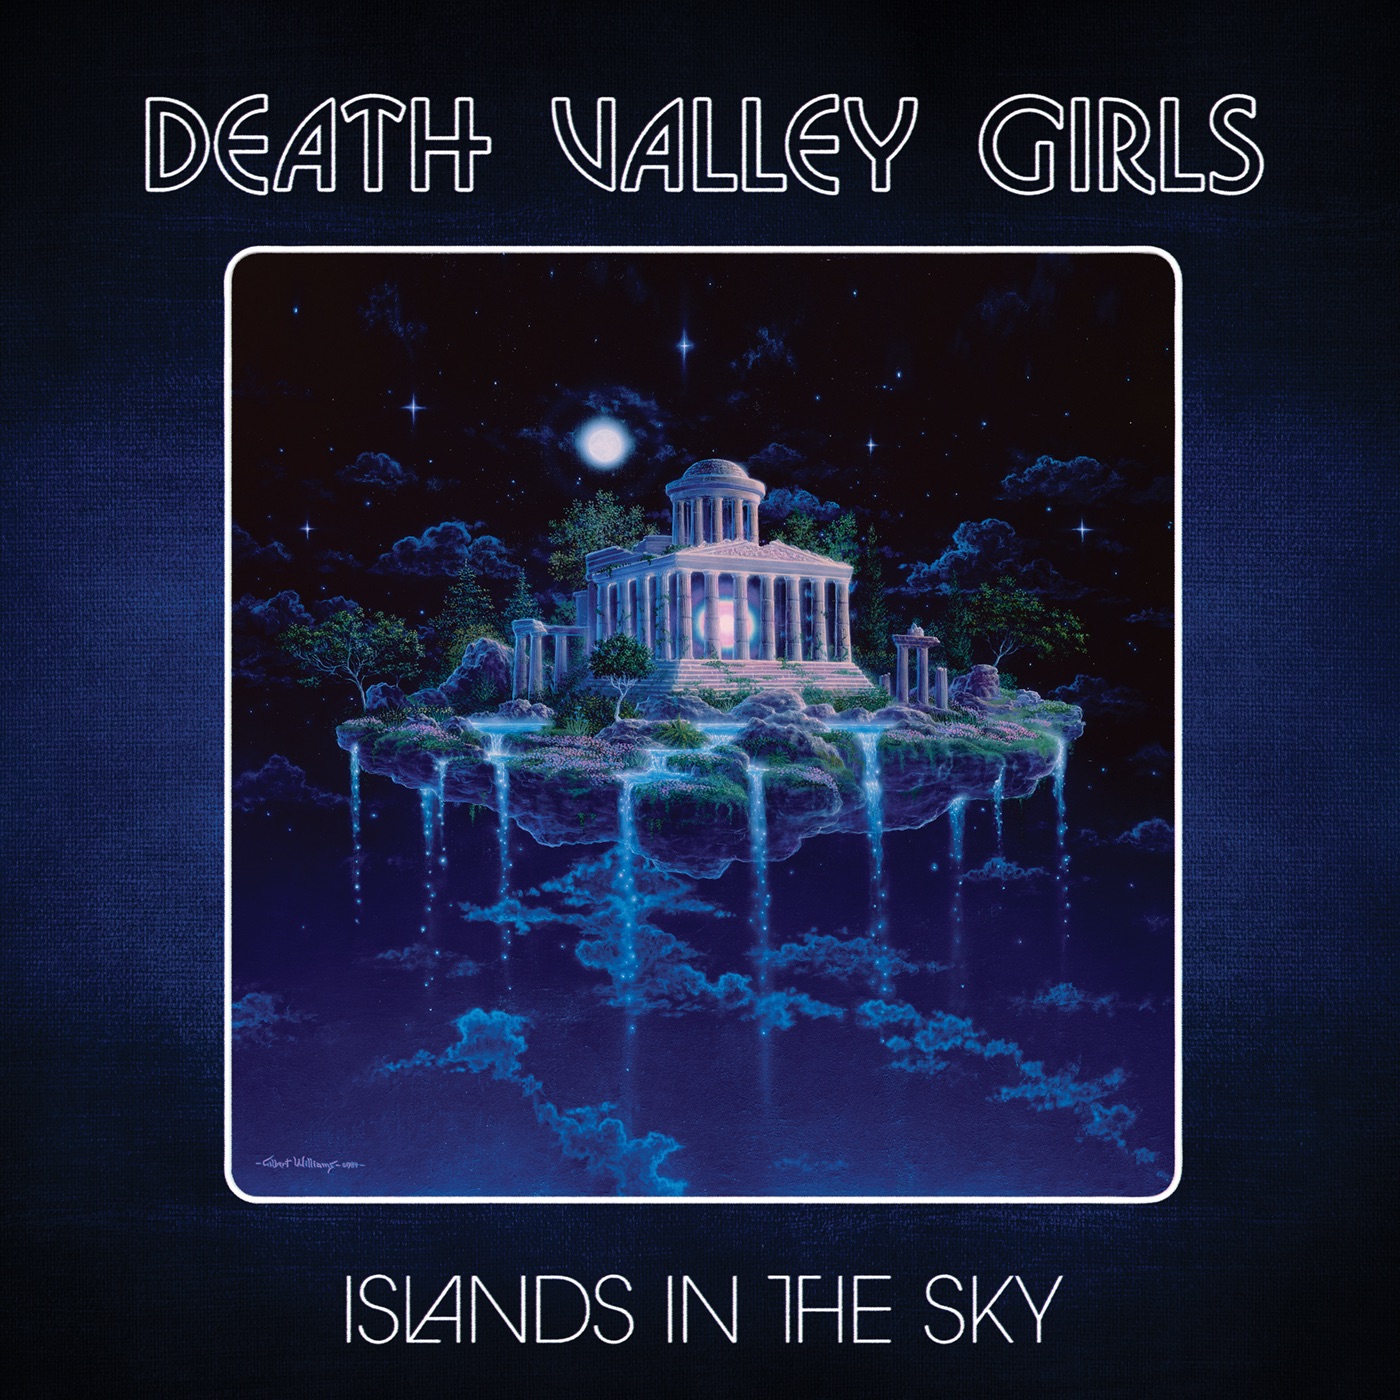 Islands in the Sky by Death Valley Girls